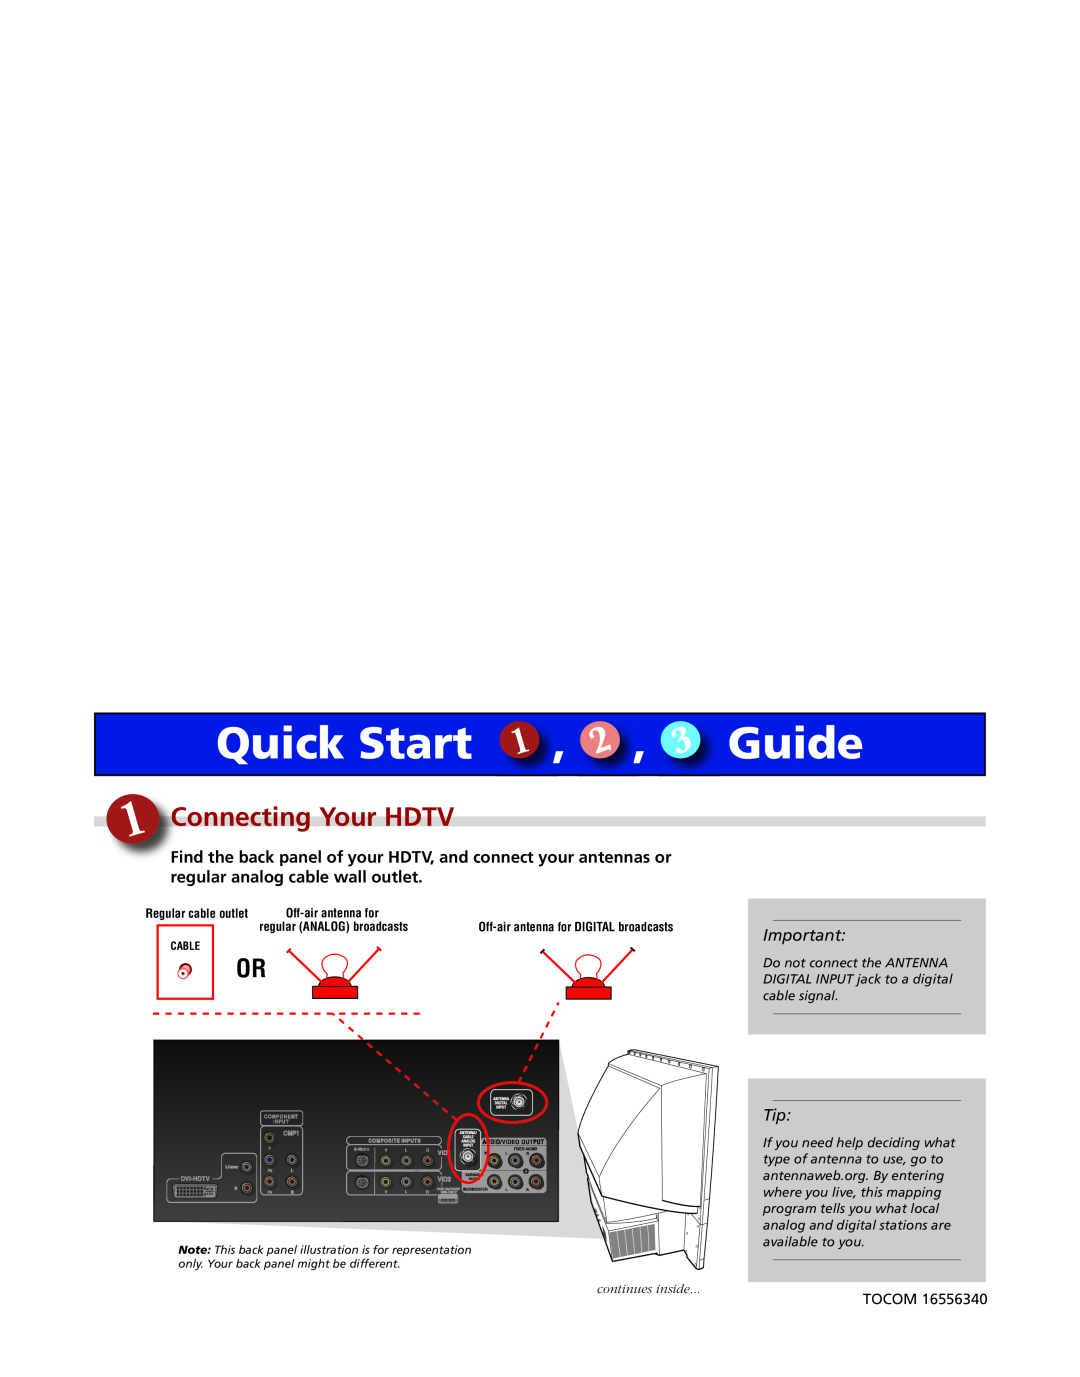 RCA hd52w59 quick start Quick Start, Guide, Connecting Your HDTV, Tocom, continues inside 